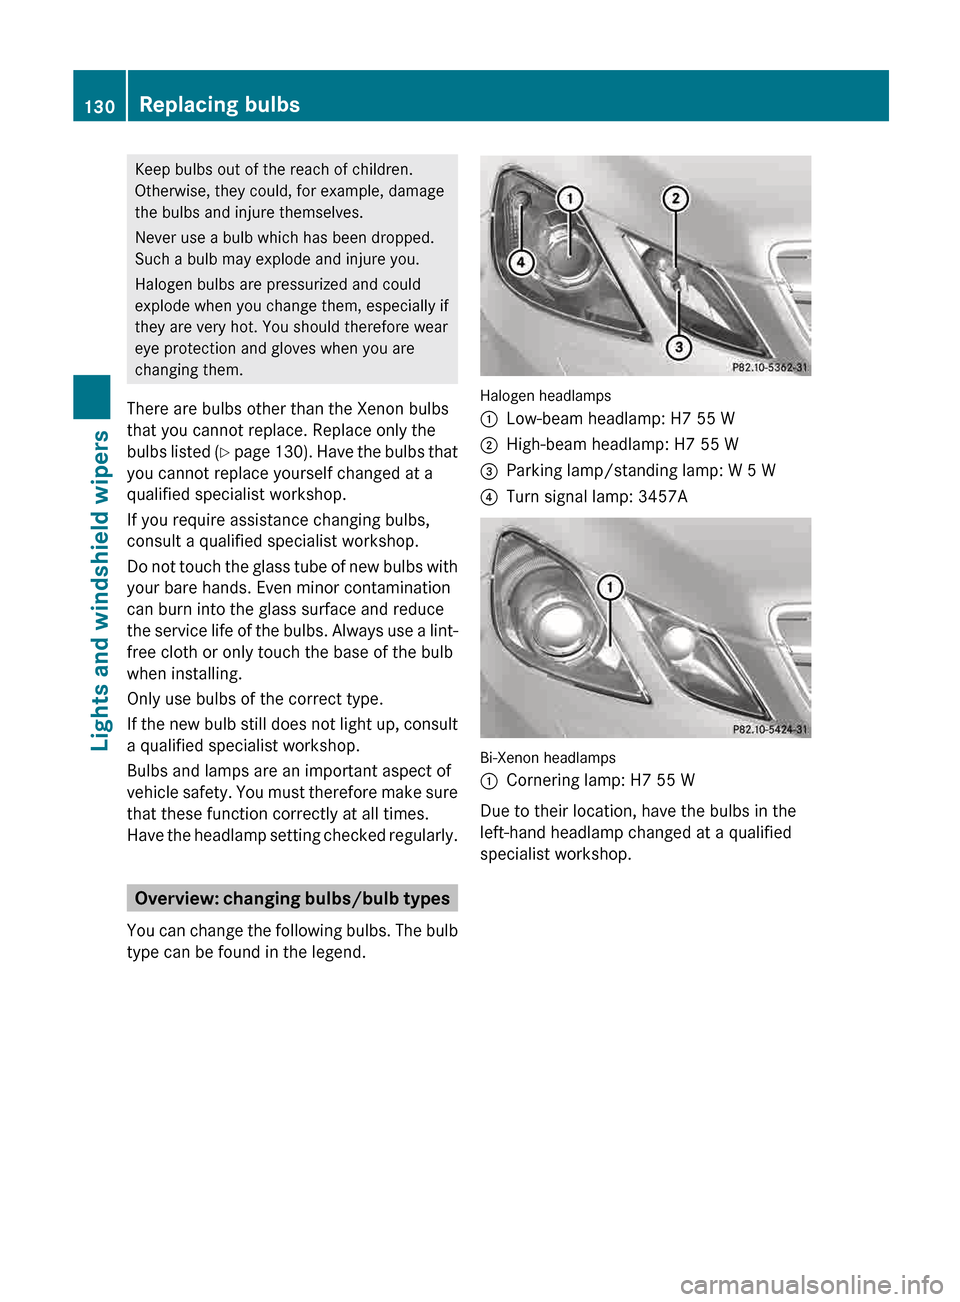 MERCEDES-BENZ E-Class CABRIOLET 2013 C207 User Guide Keep bulbs out of the reach of children.
Otherwise, they could, for example, damage
the bulbs and injure themselves.
Never use a bulb which has been dropped.
Such a bulb may explode and injure you.
Ha